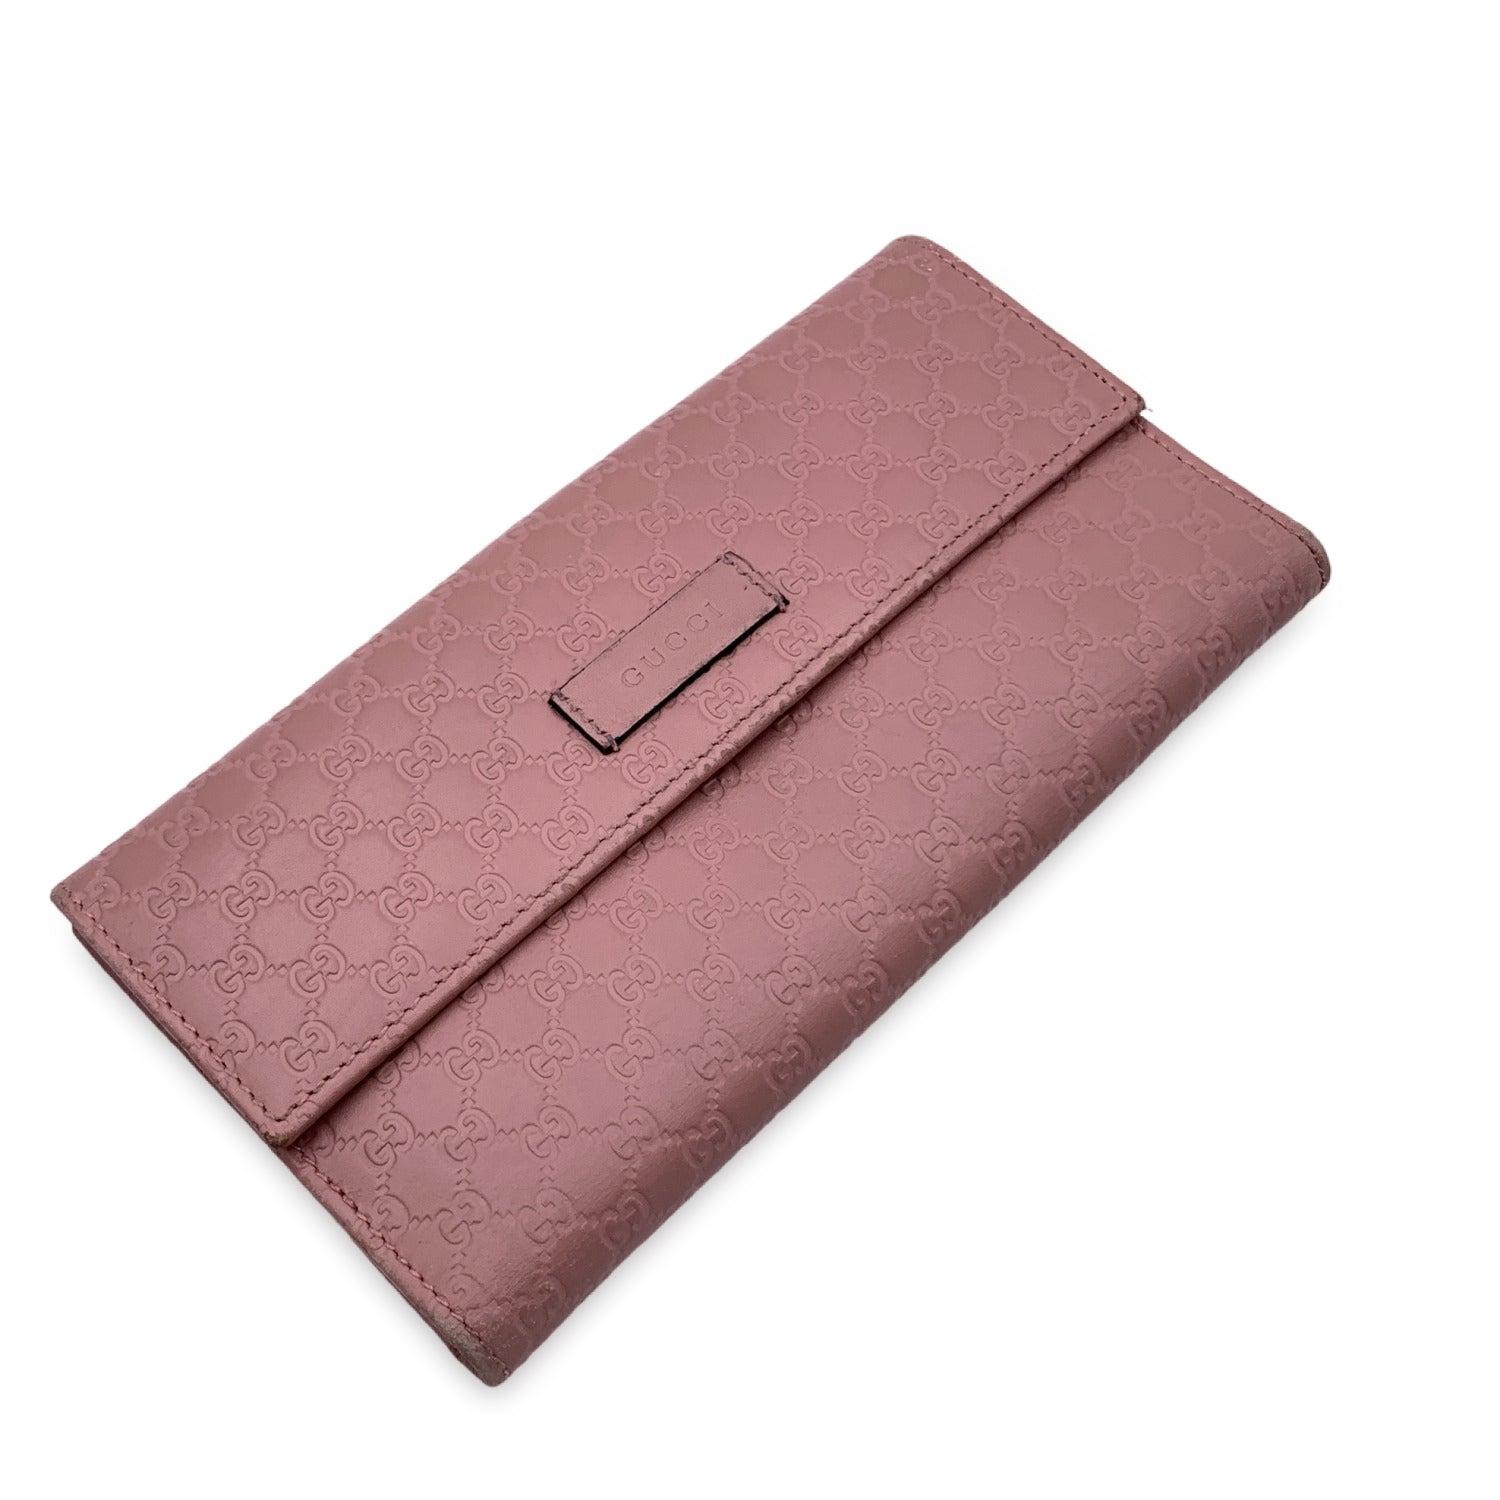 Gucci pink microguccissima continental long wallet. Flap coin compartment with button closure. Inside, 2 compatments, 7 credit card slots, 2 flat open pockets. 'Gucci - Made in Italy' engraved inside. Serial number engraved inside Details MATERIAL: